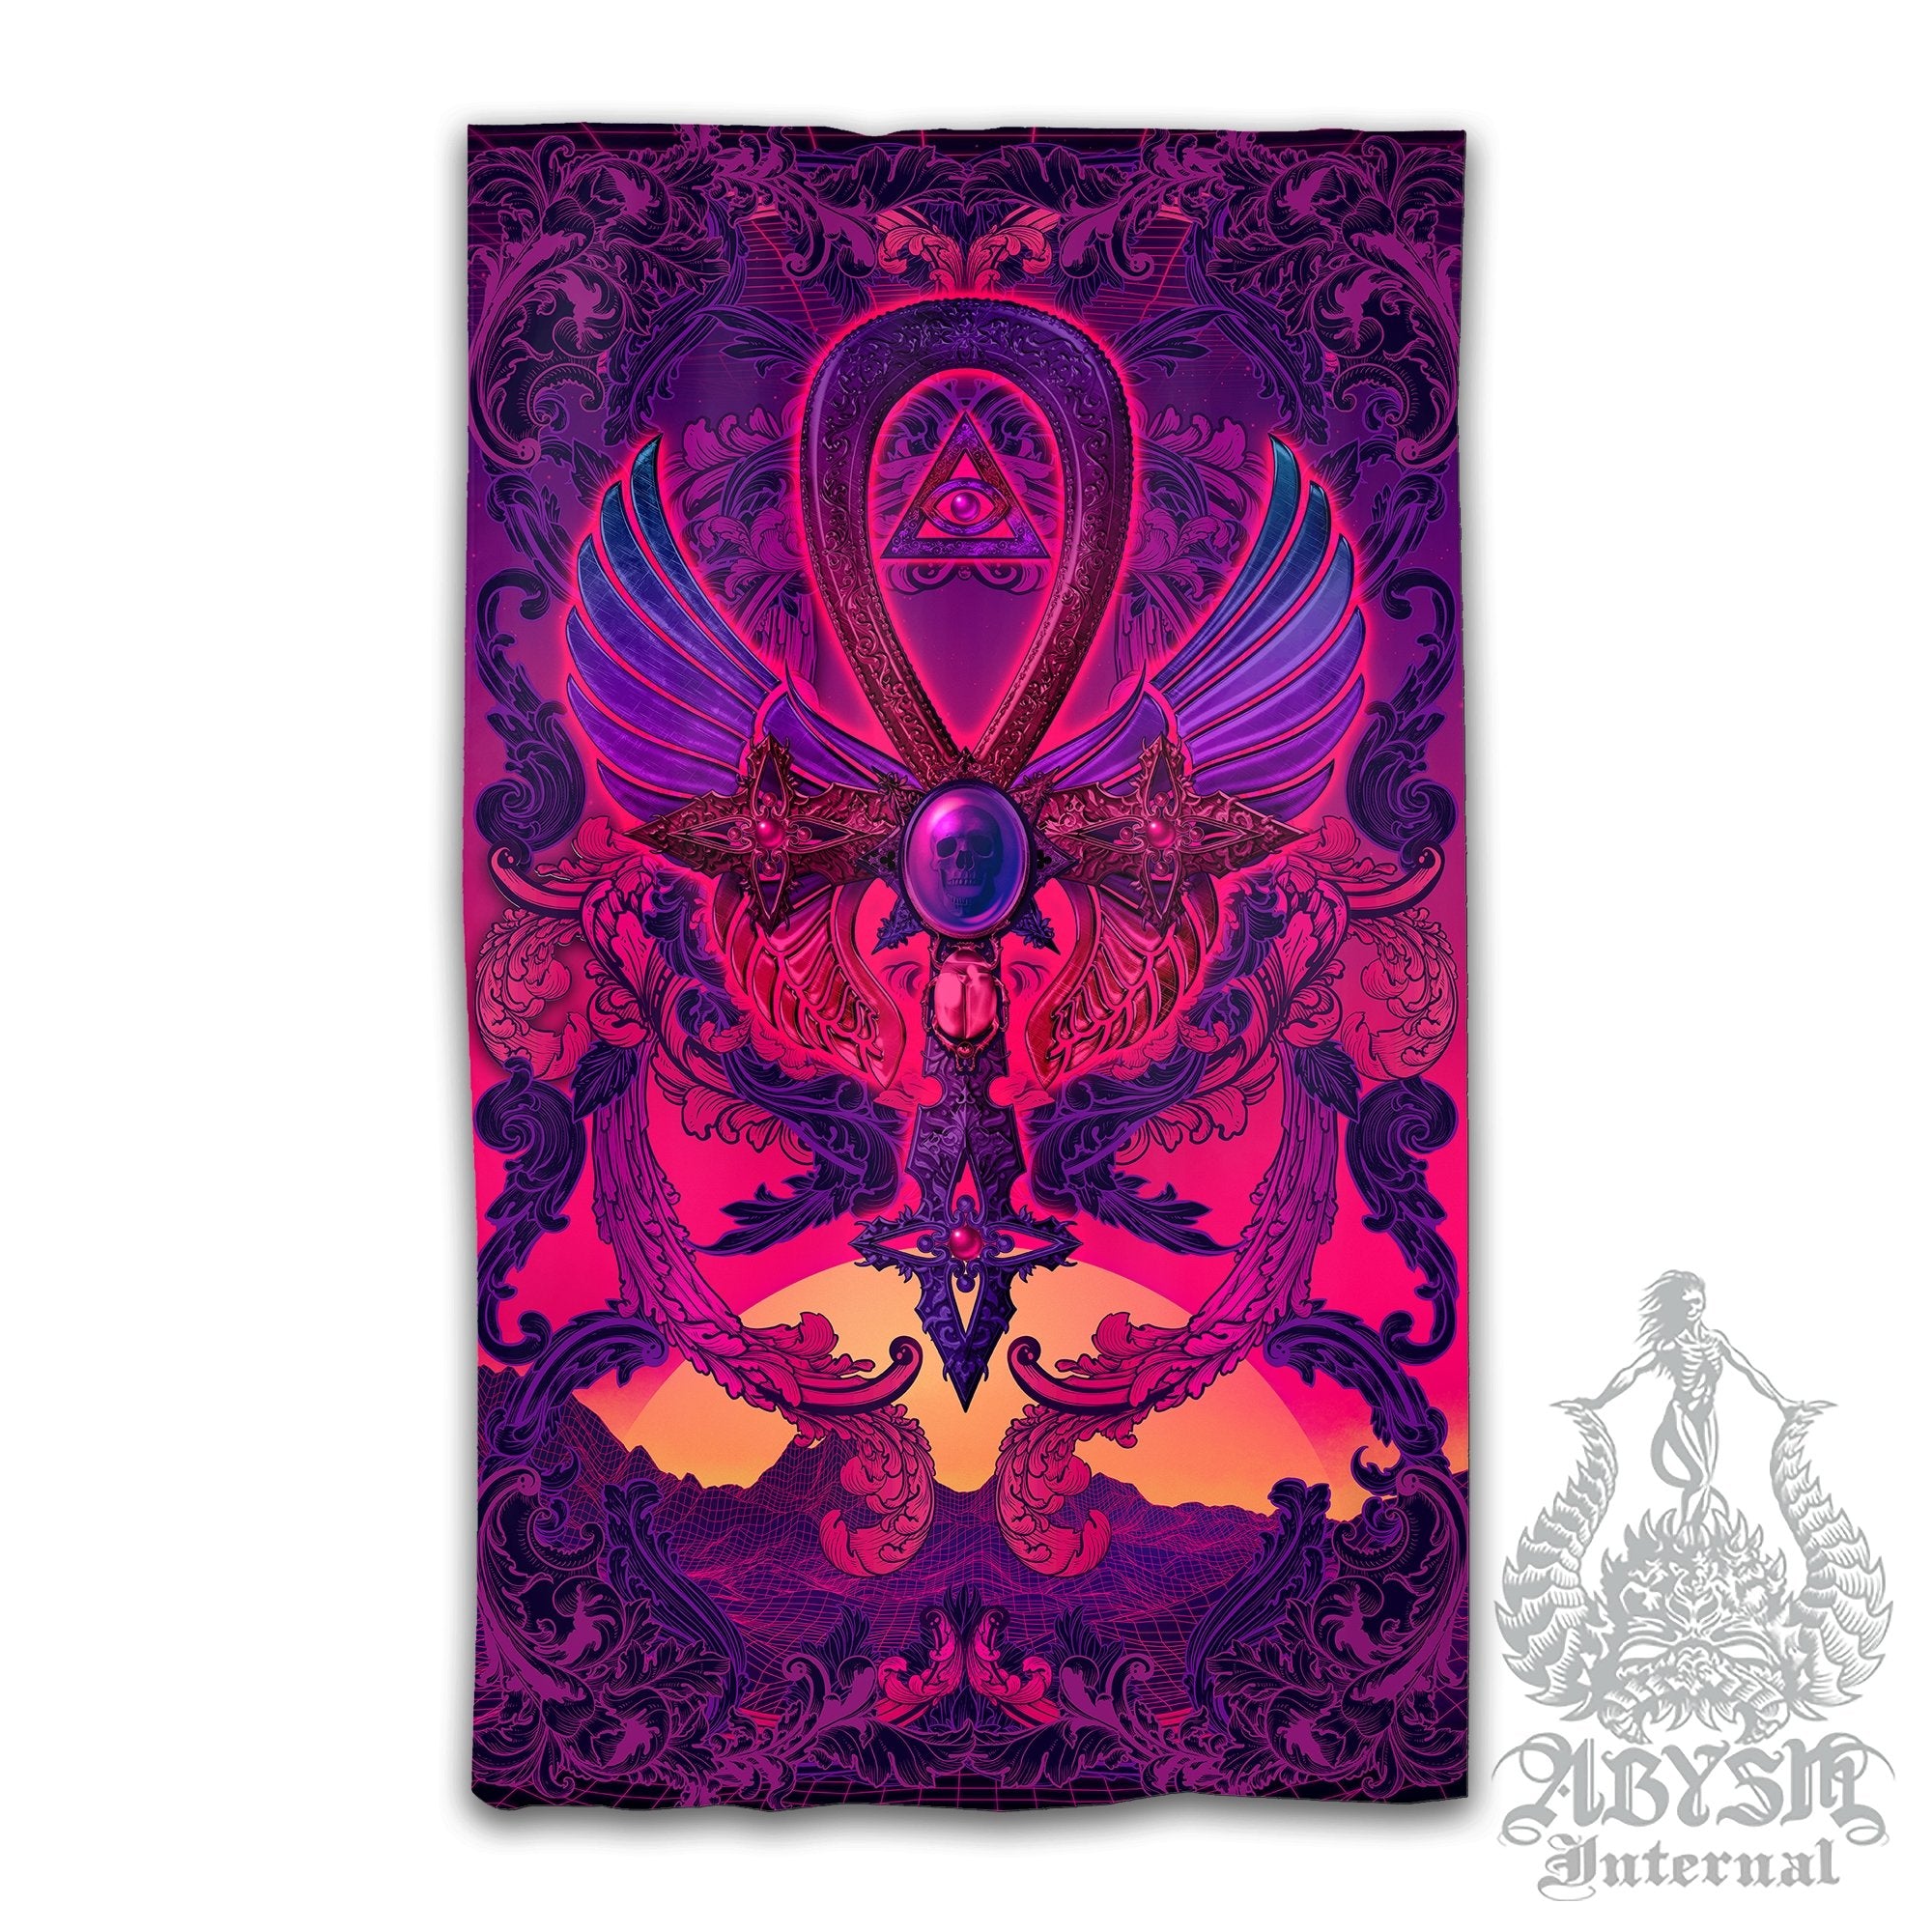 Synthwave Blackout Curtains, Long Window Panels, Psychedelic Art Print, Vaporwave Room Decor, 80s Gamer Retrowave Home and Shop Decor - Ankh - Abysm Internal